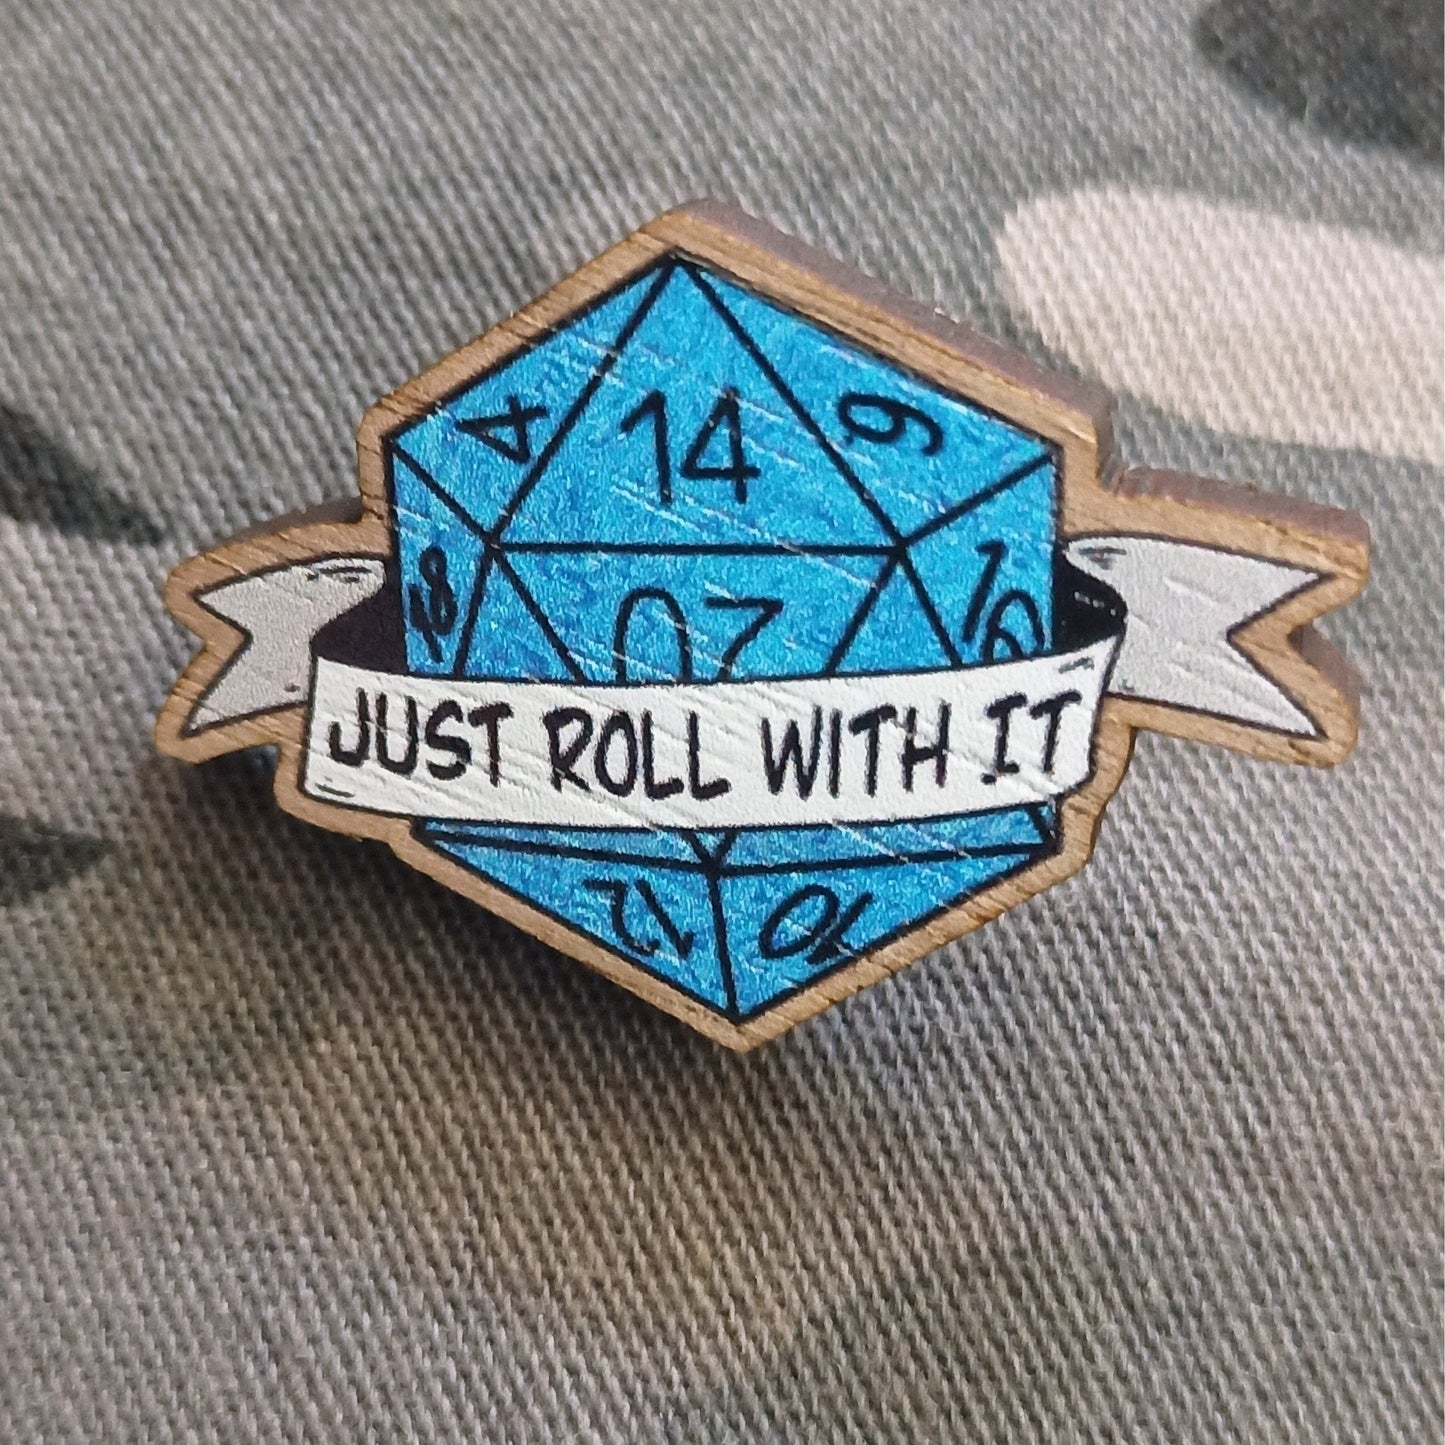 Roll With It | Wooden Pin 1.5" | Deviant Kreations - Deviantkreations